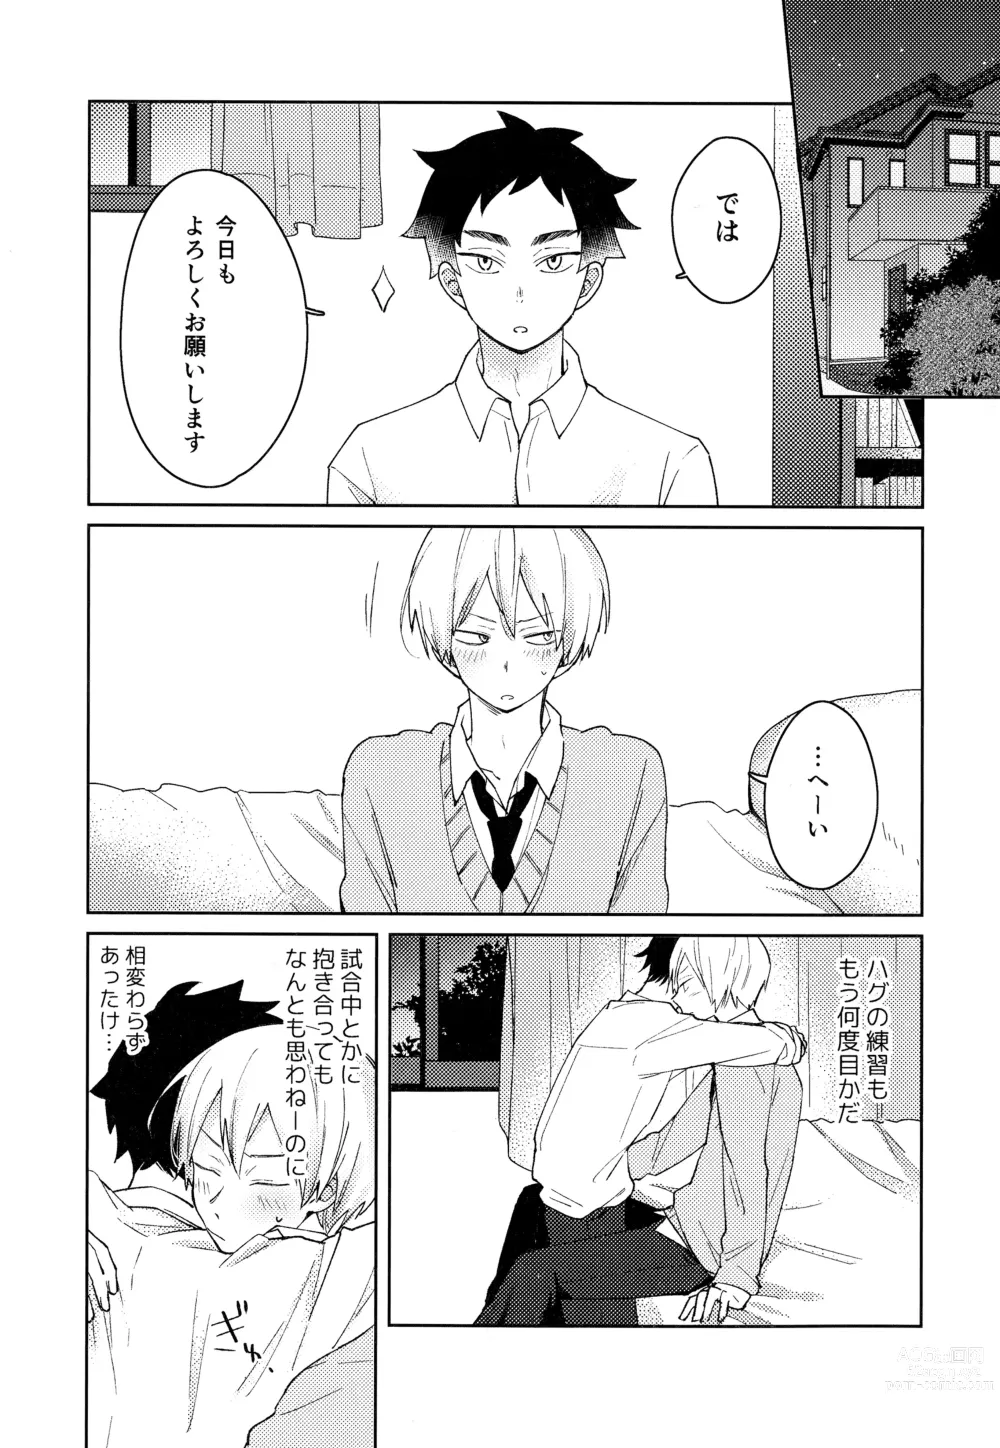 Page 25 of doujinshi Light Side Day